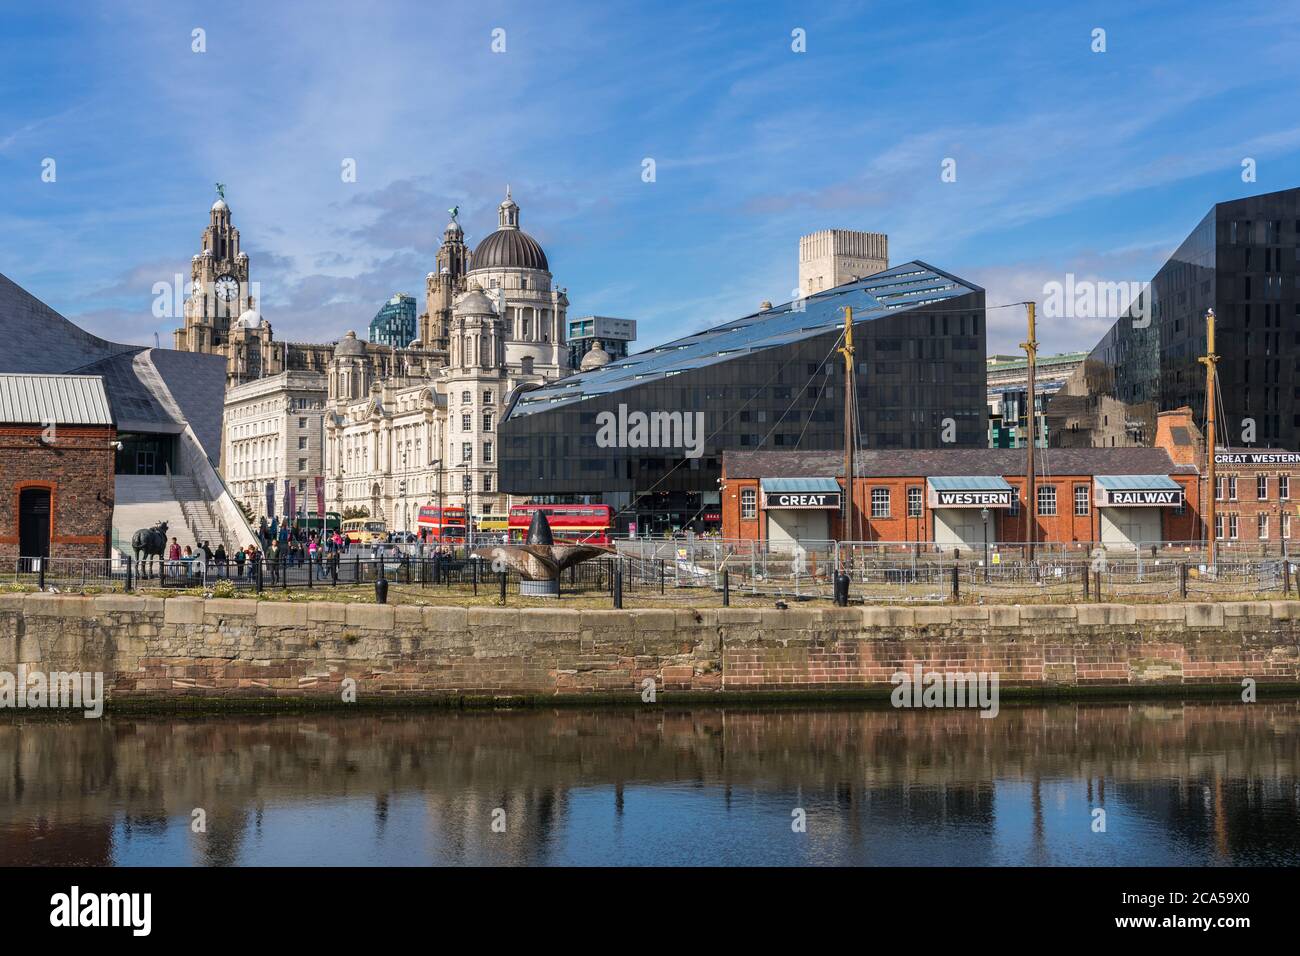 Liverpool waterfront with the Great Western Railway building and the Three Graces in the background, Liverpool, UK Stock Photo